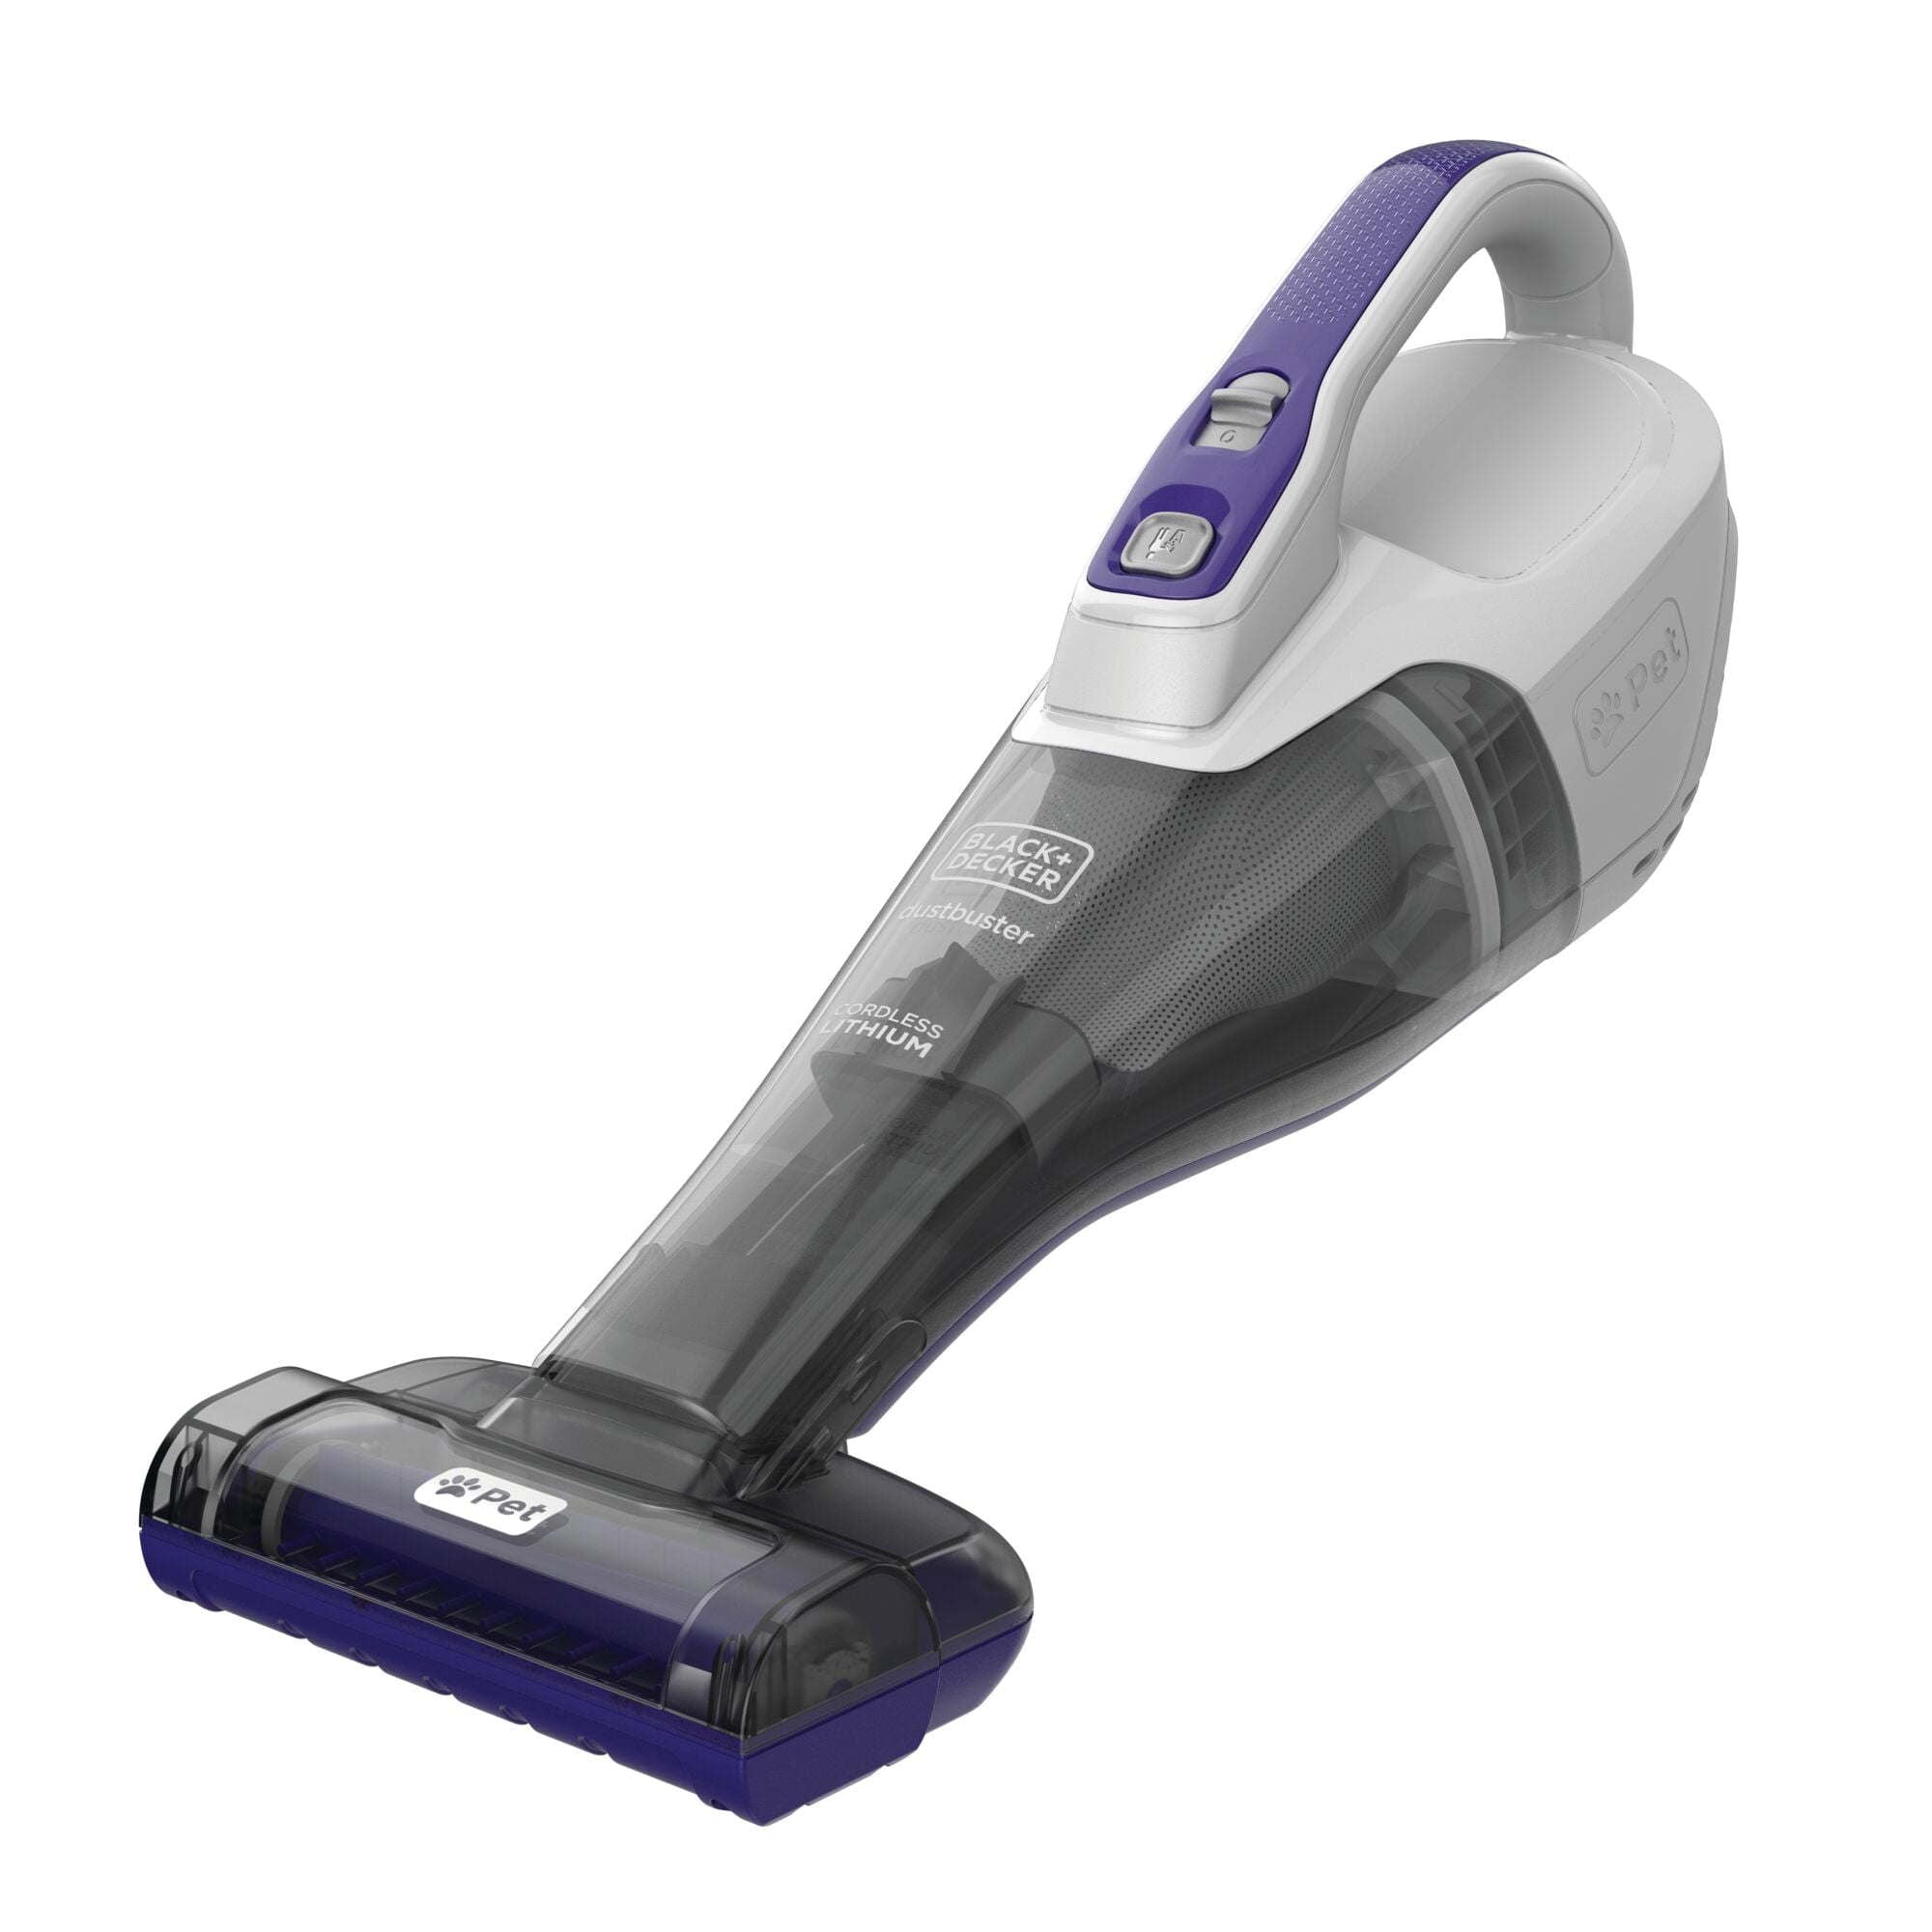 A Furbuster Cordless Pet Hand Vacuum with a purple handle.